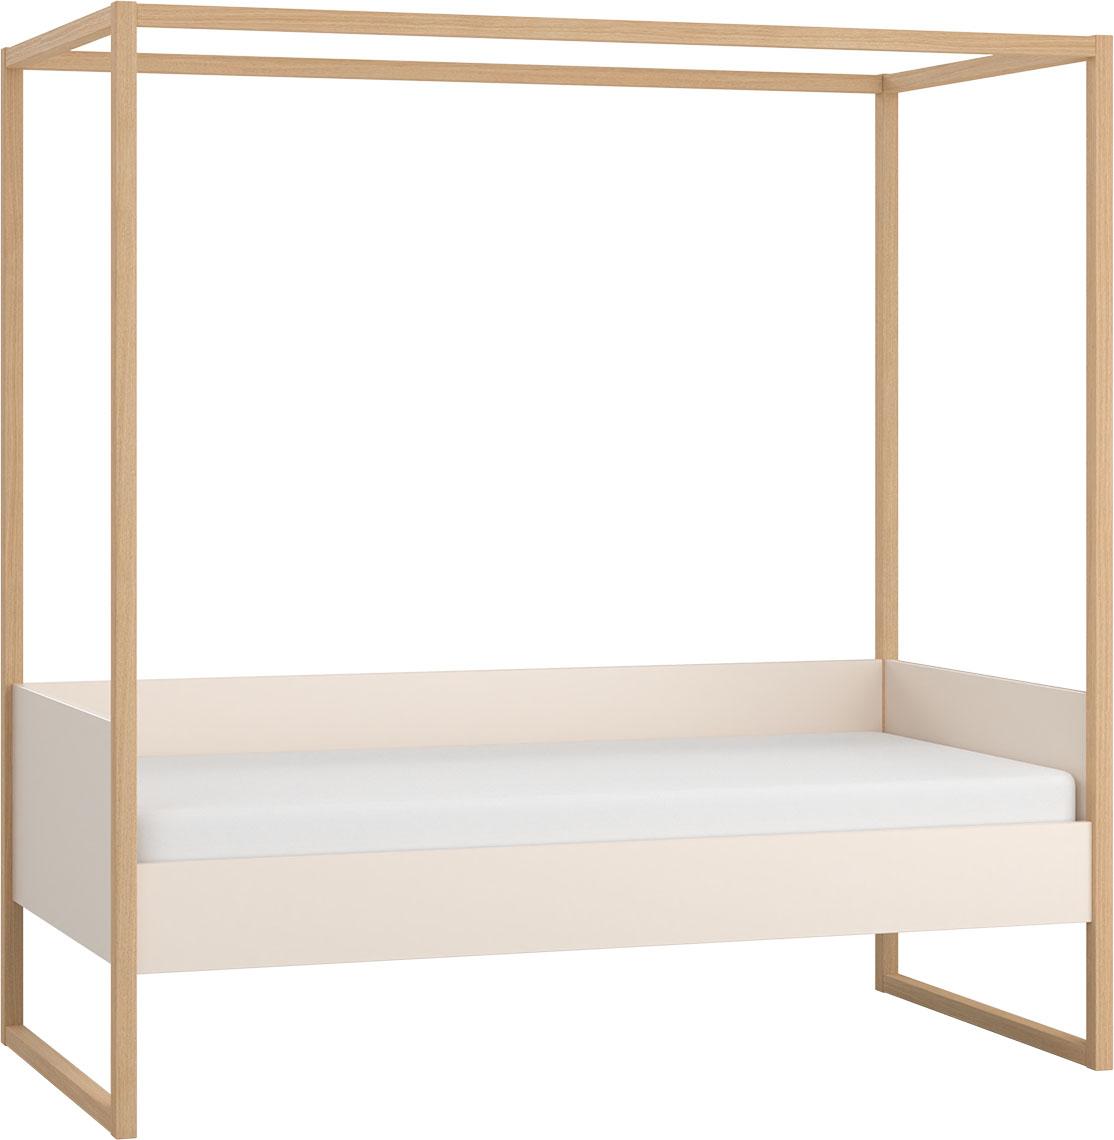 Single bed with canopy 4 You Fresh